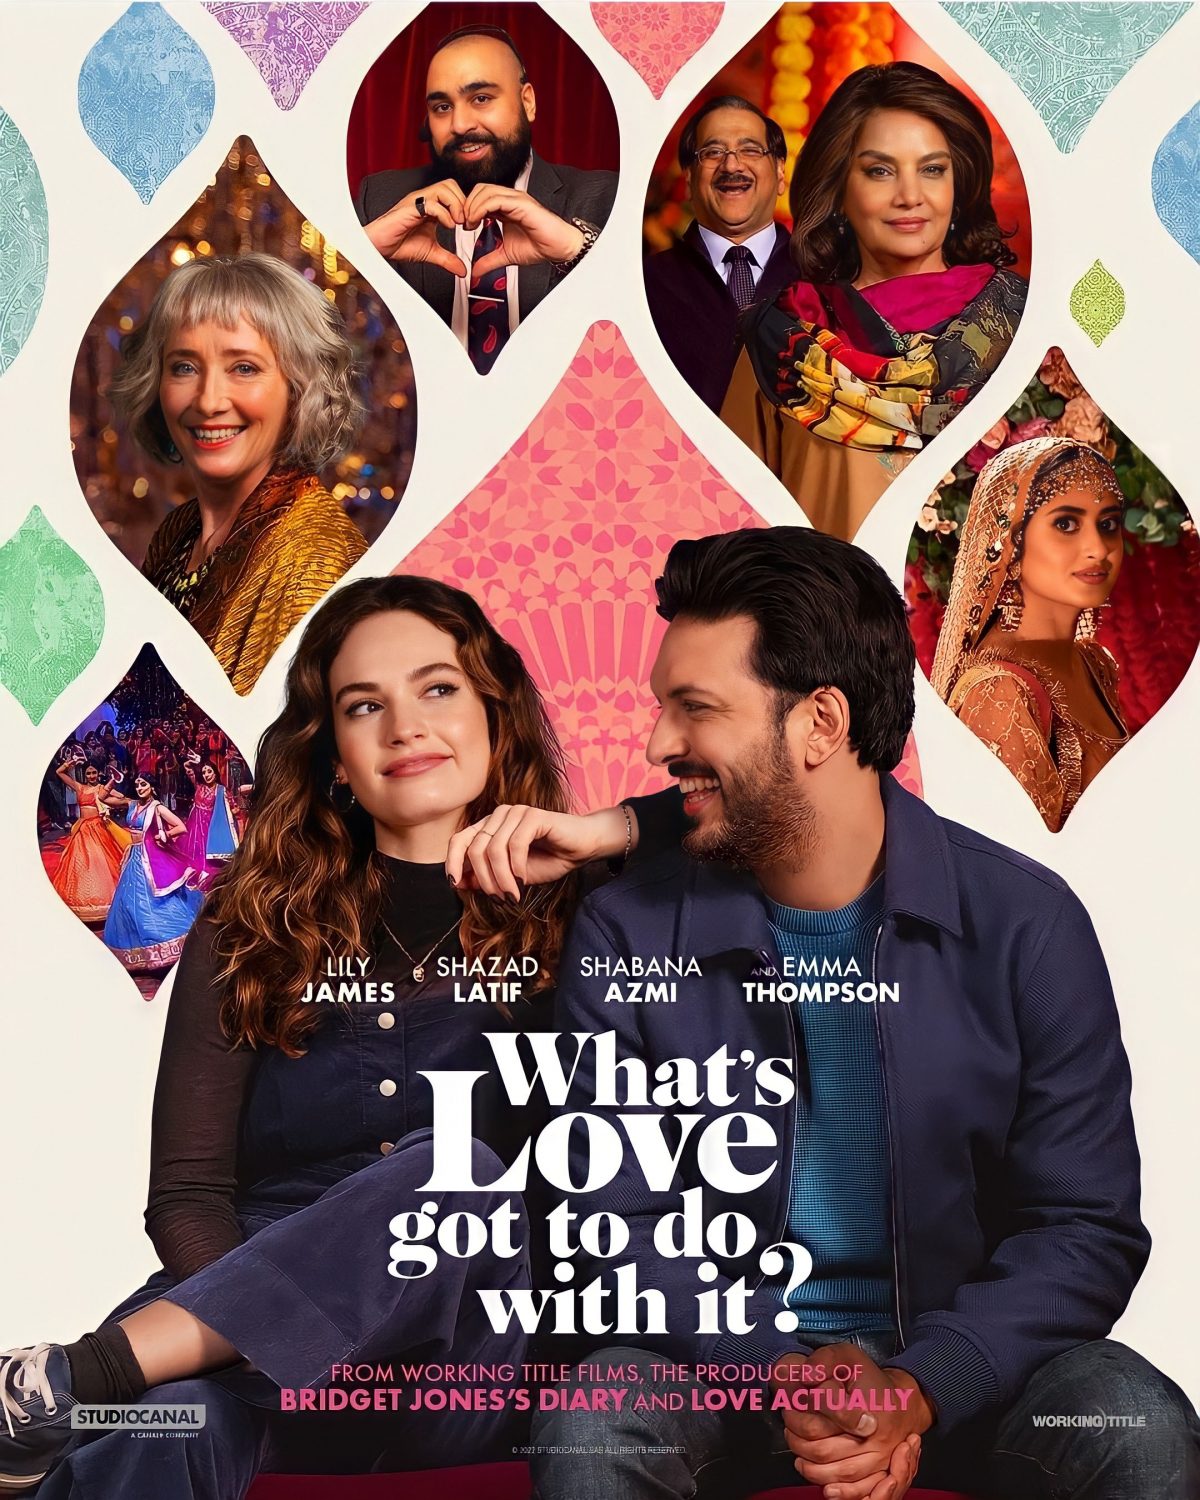 The poster for What’s Love Got to do With It? (Amazon.com image)